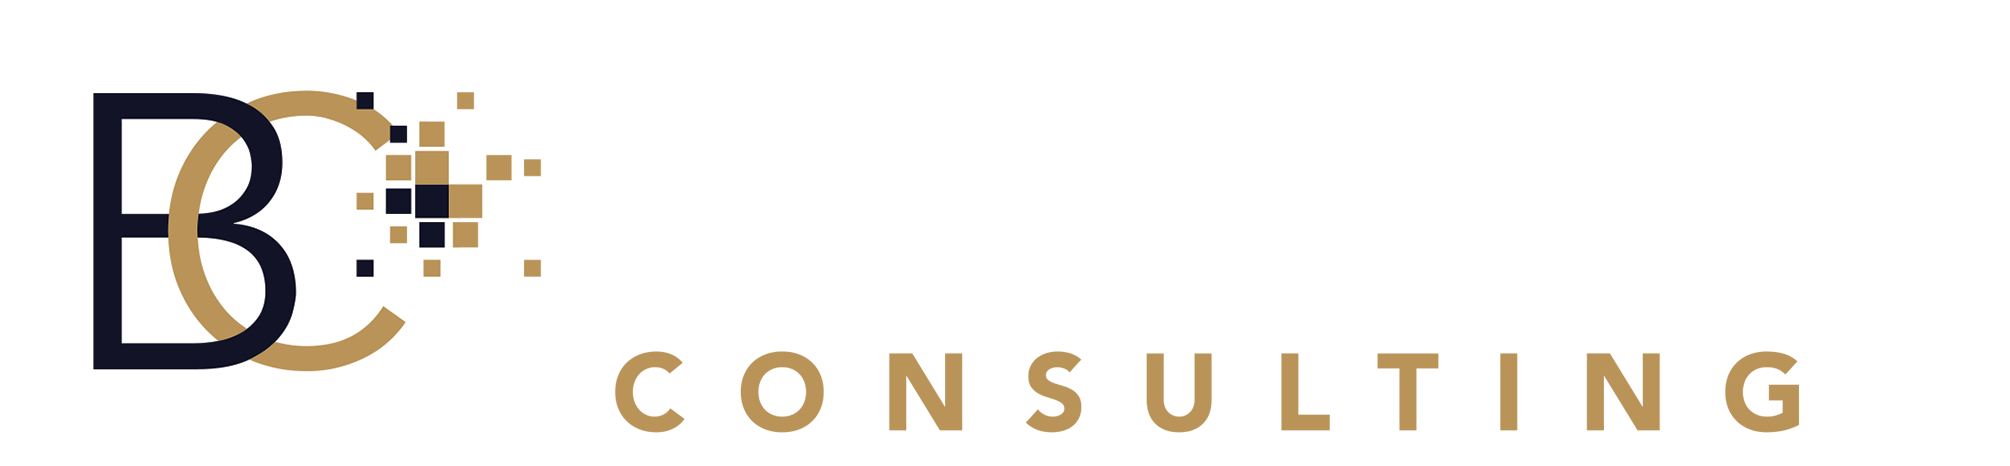 Brodtmann Consulting Logo